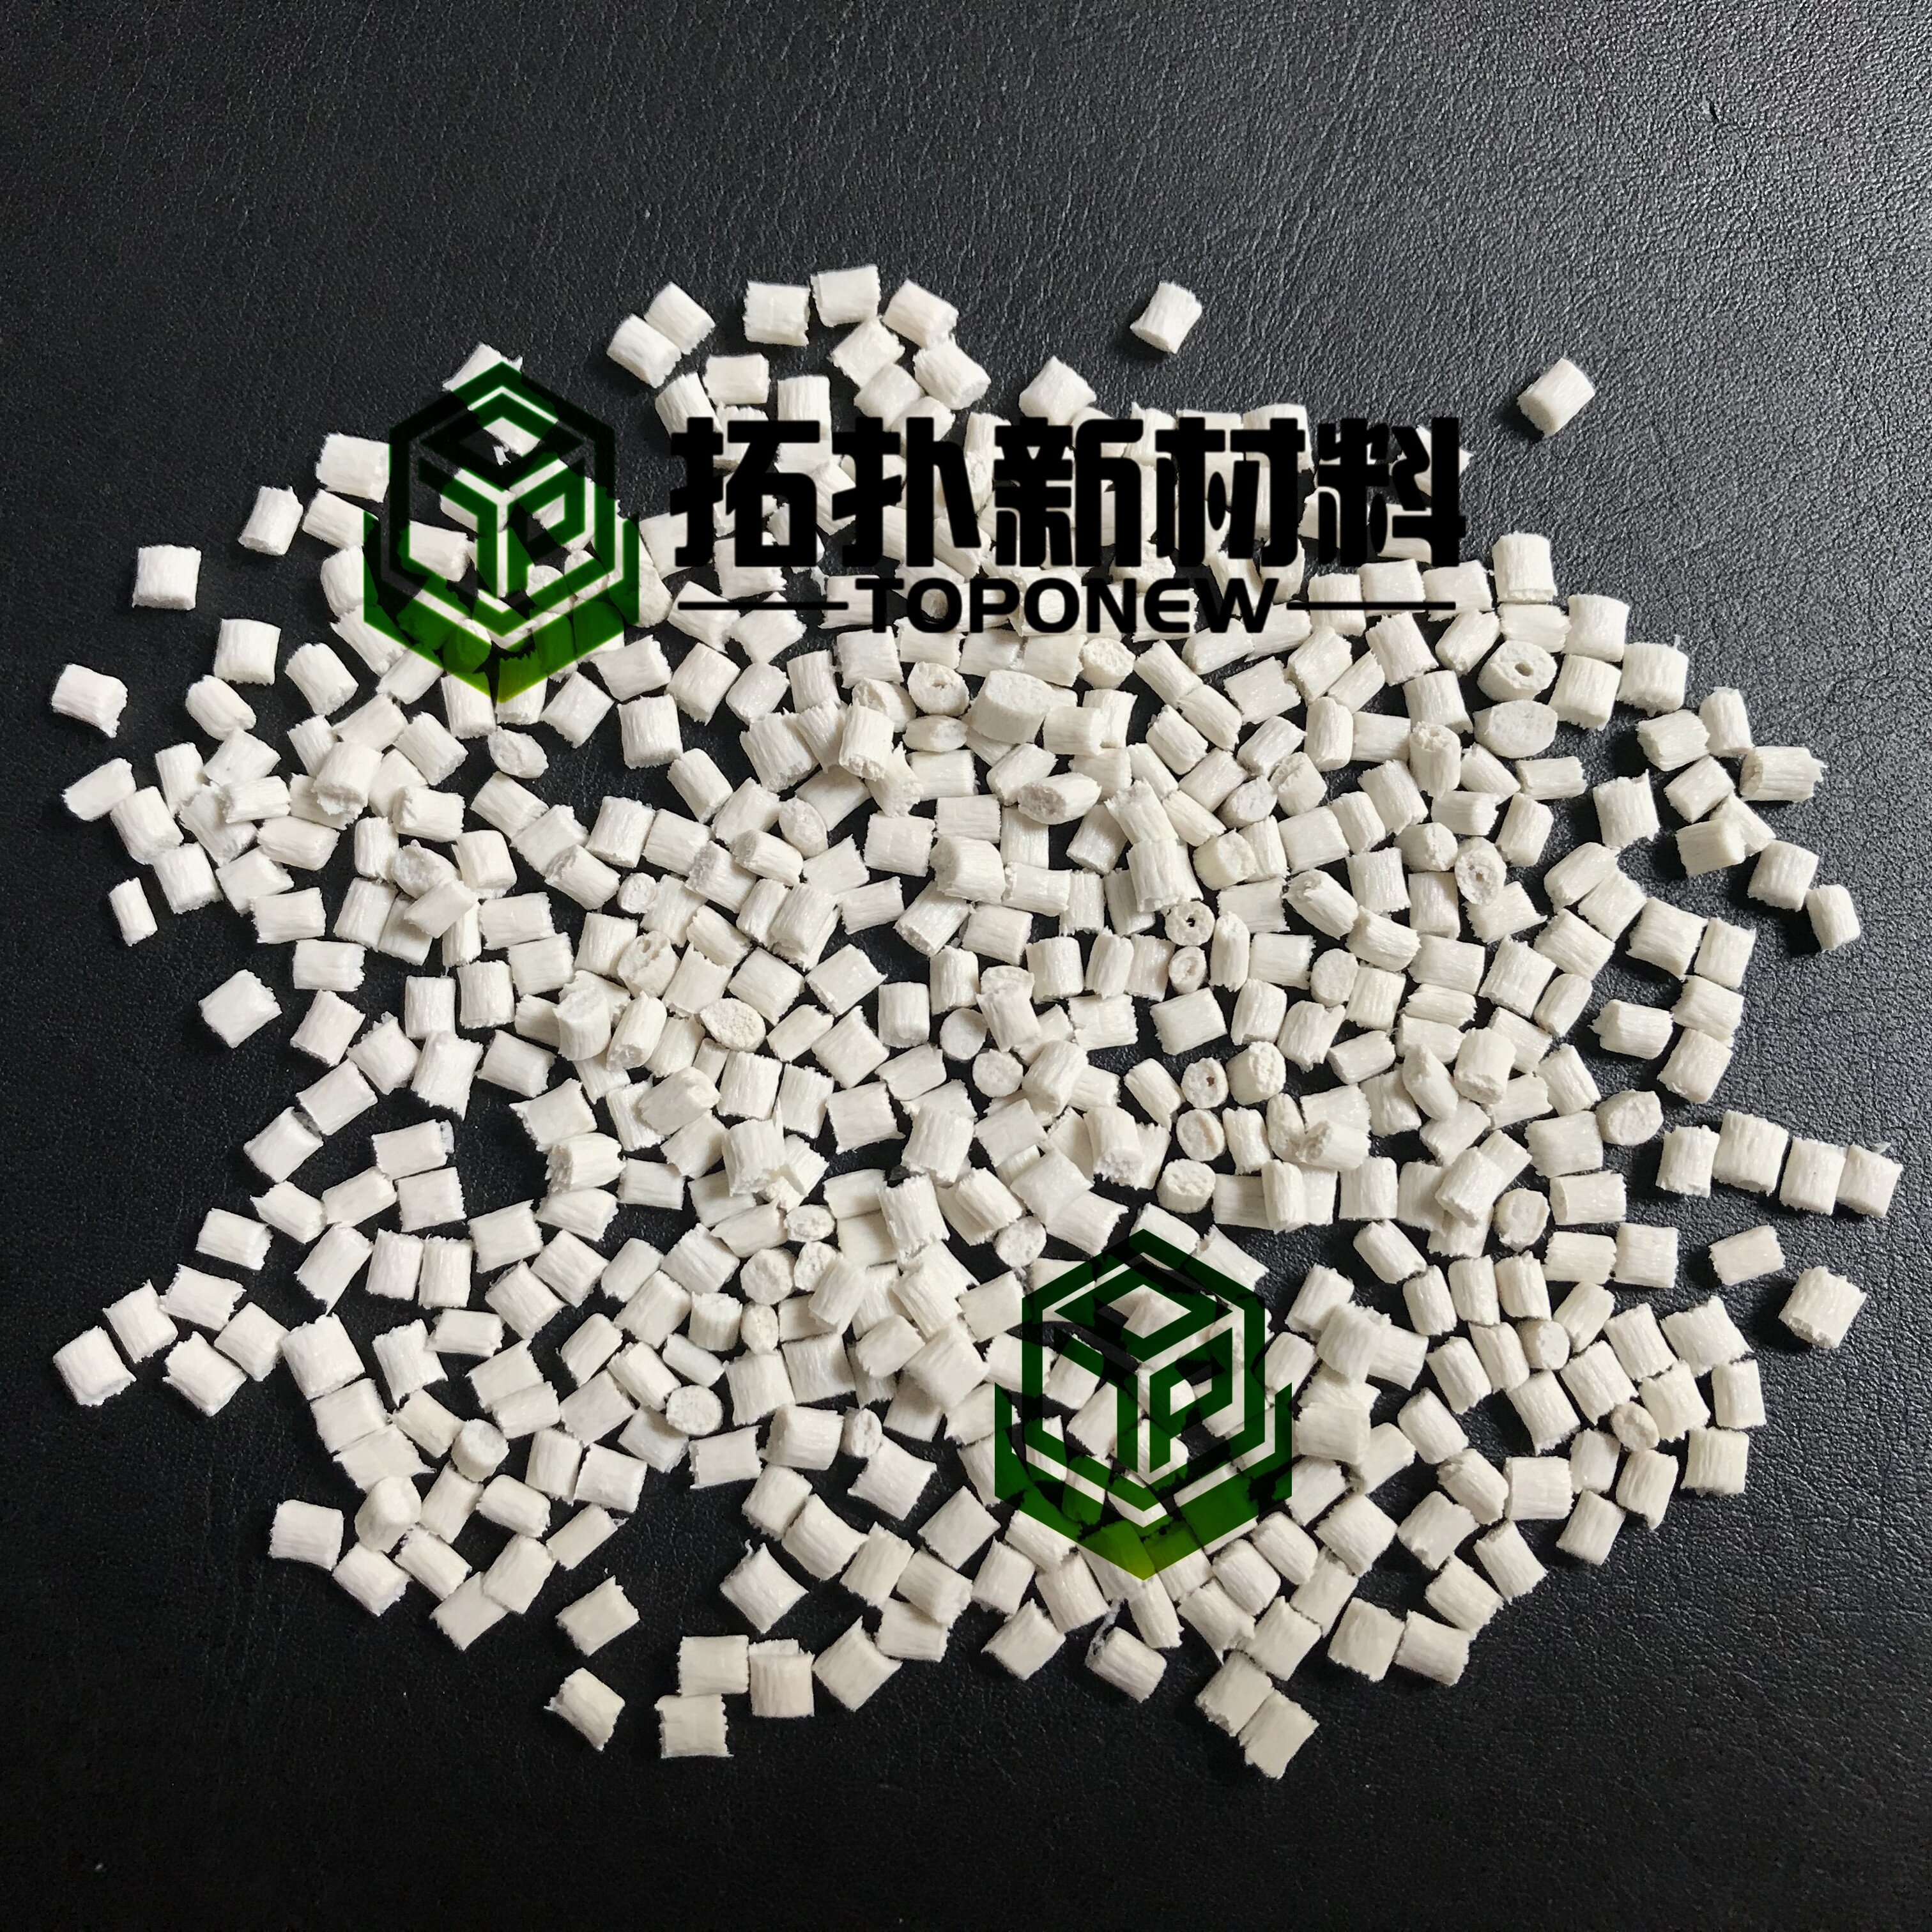 PA 6 Natural, Engineering Plastics, uses of nylon 6,  what does the 6 in nylon 6 mean, nylon 6 pellets, nylon 6 raw material, nylon 6 manufacturers,  plastic granules for injection molding